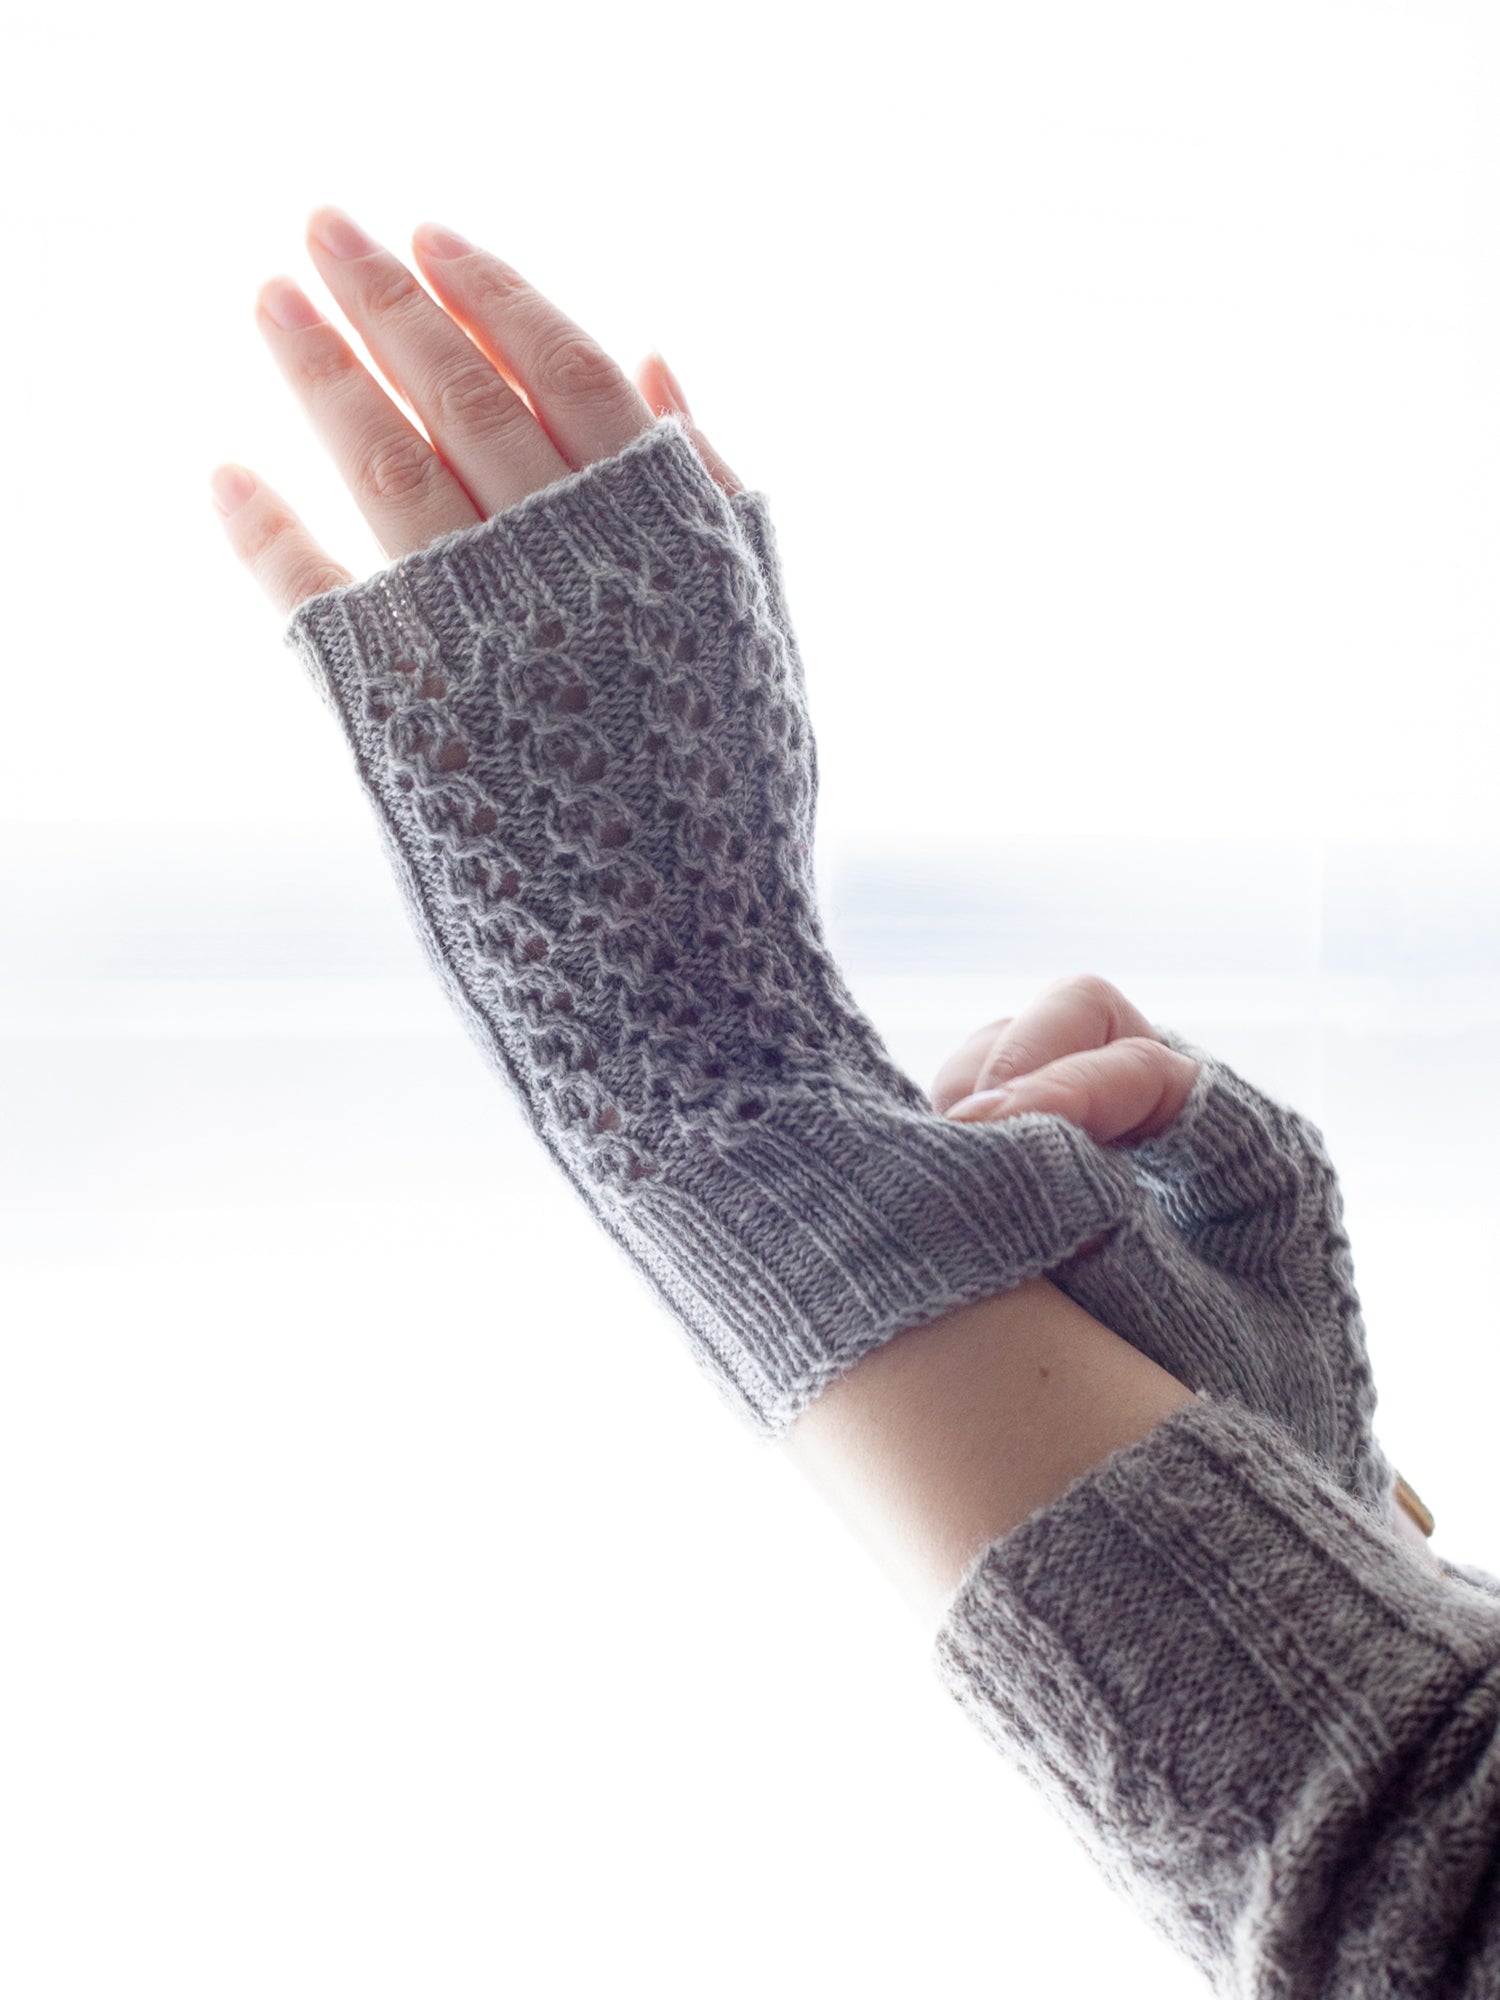 Cloverleaf Lace Mitts